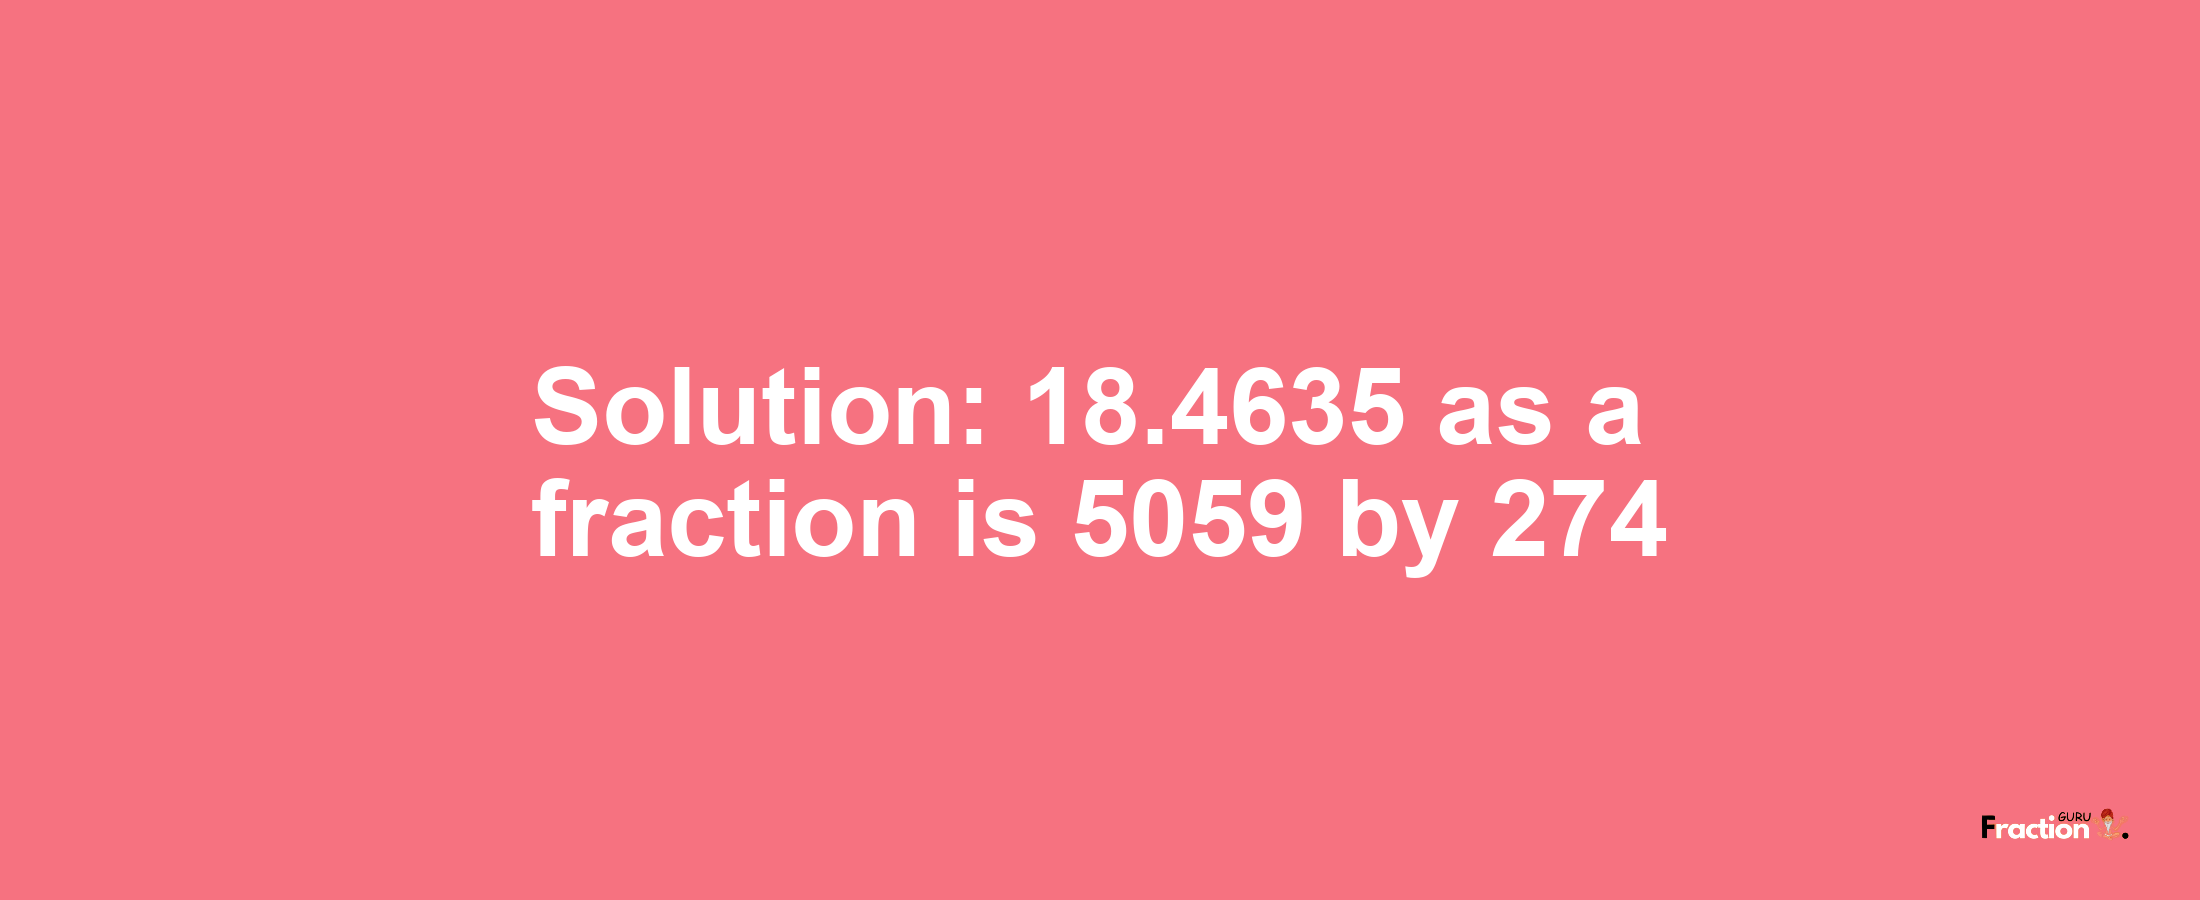 Solution:18.4635 as a fraction is 5059/274